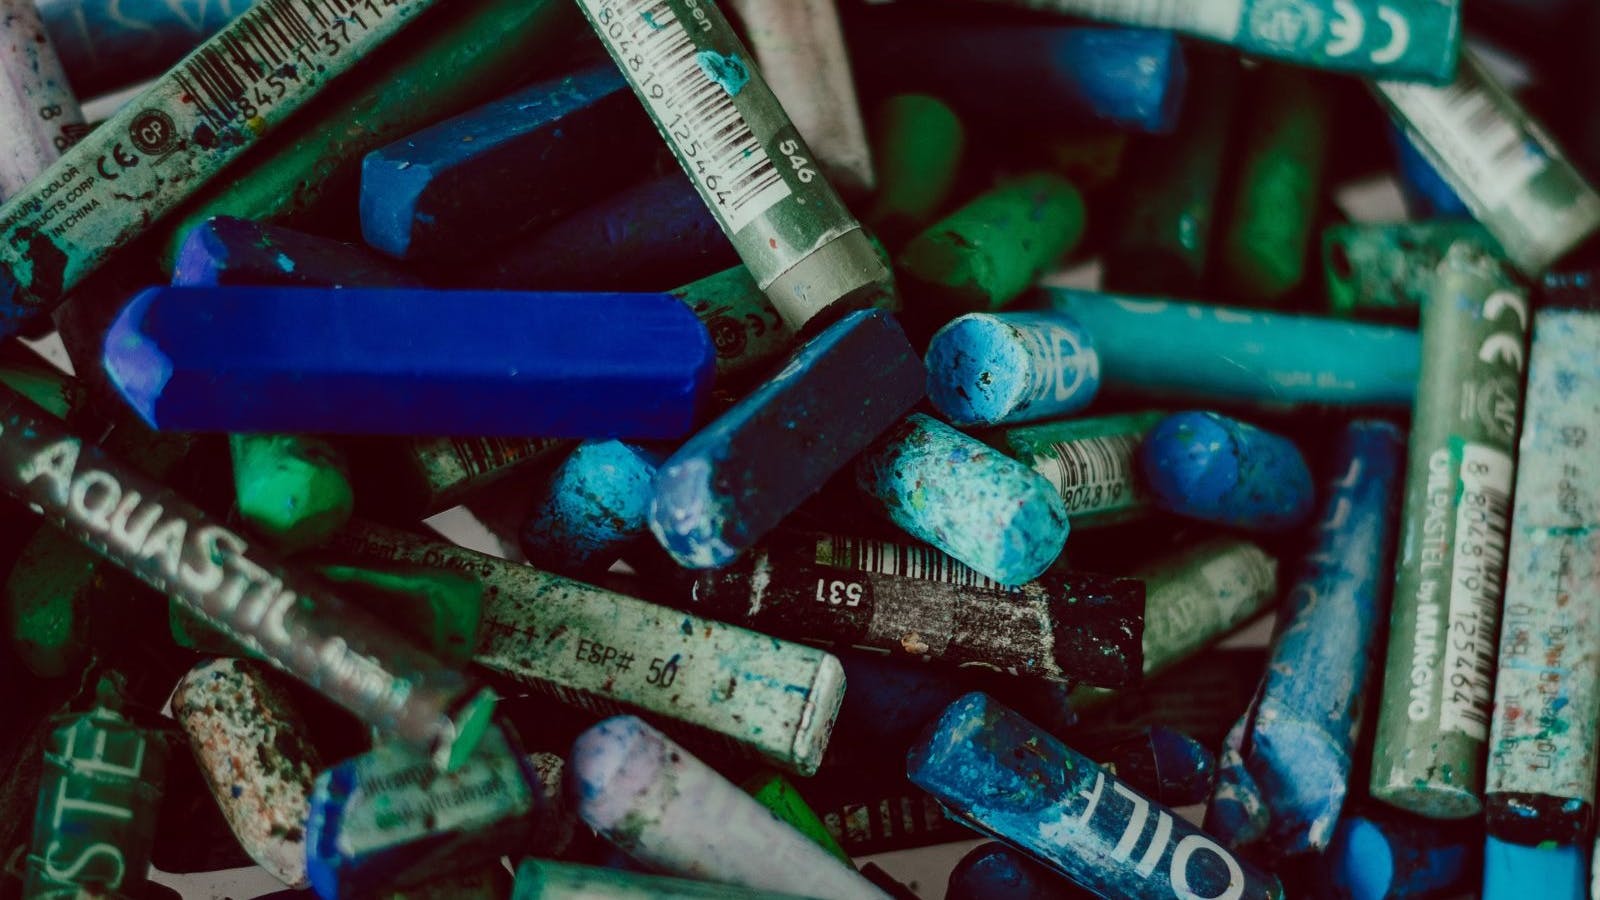 Box of blue and green crayons